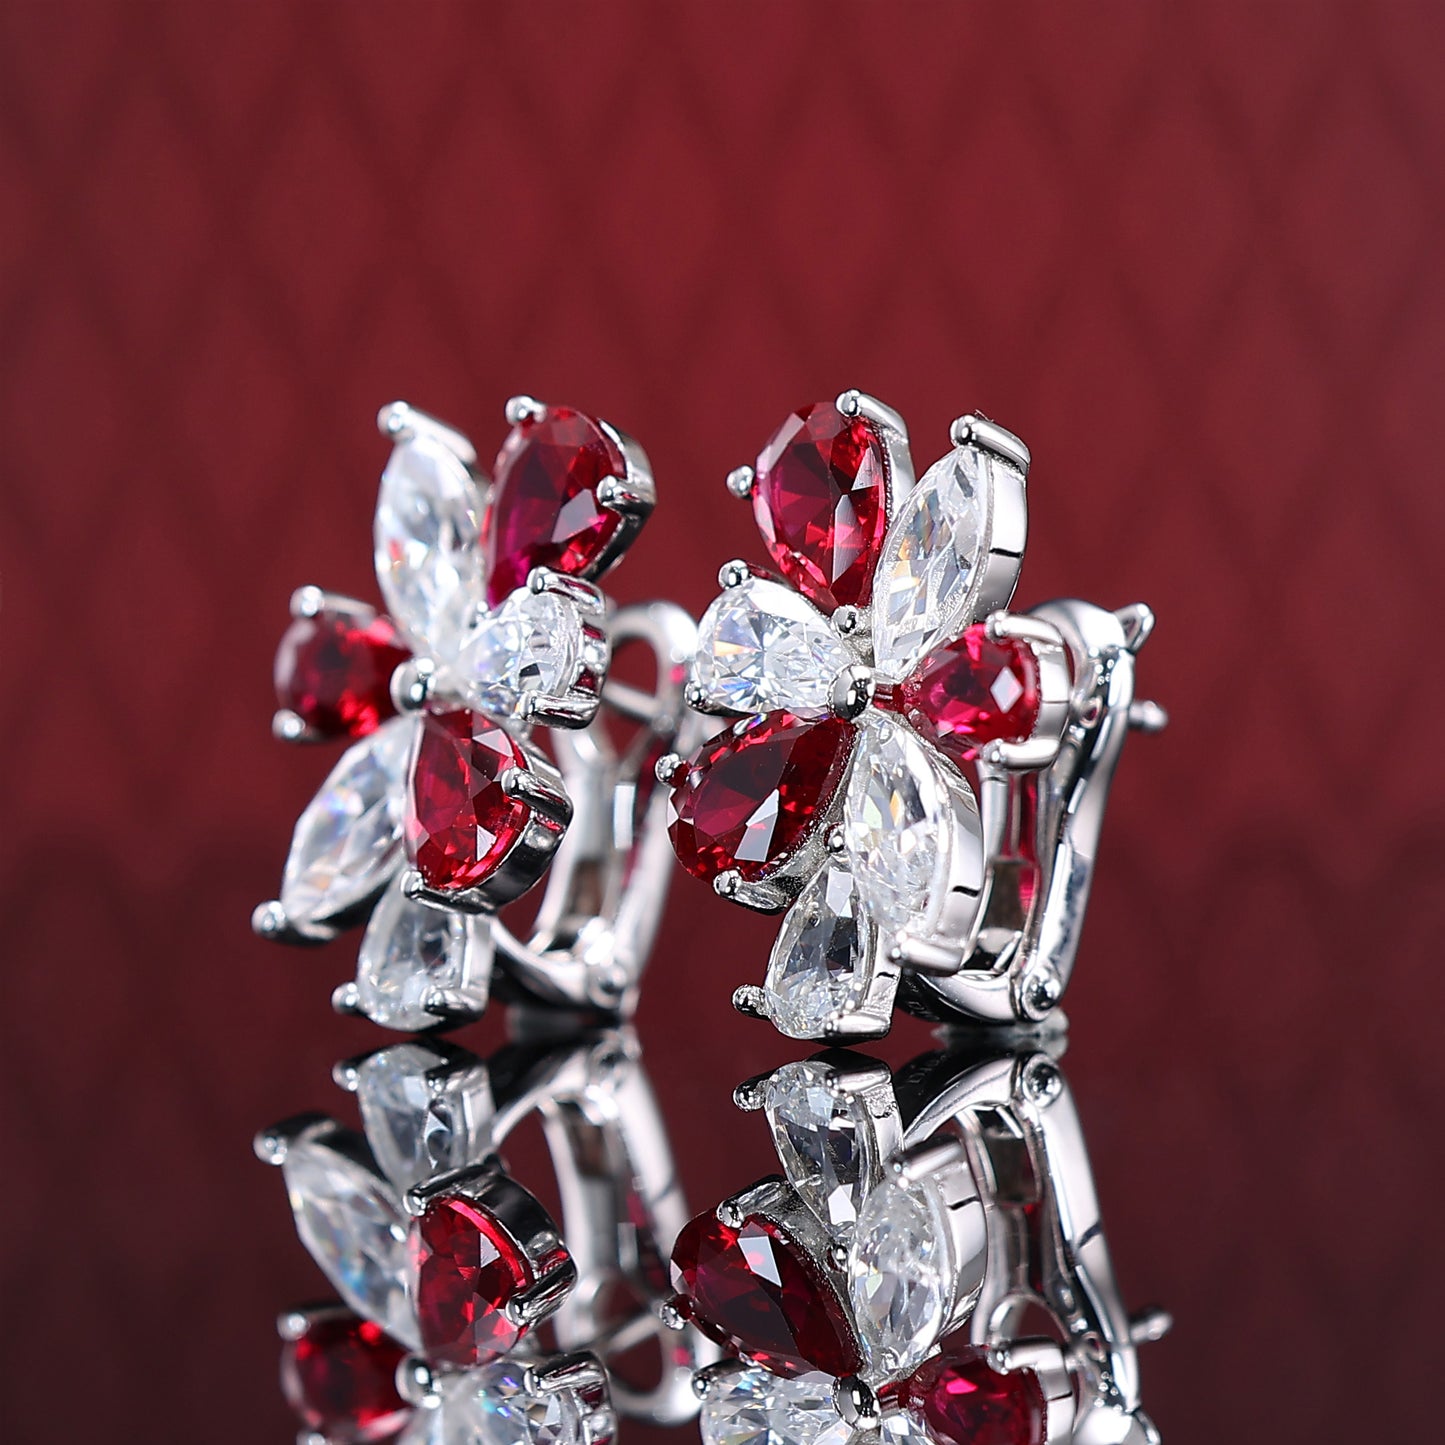 Micro-setting Ruby and diamond color Lab created stones waterdrops petal earrings, sterling silver